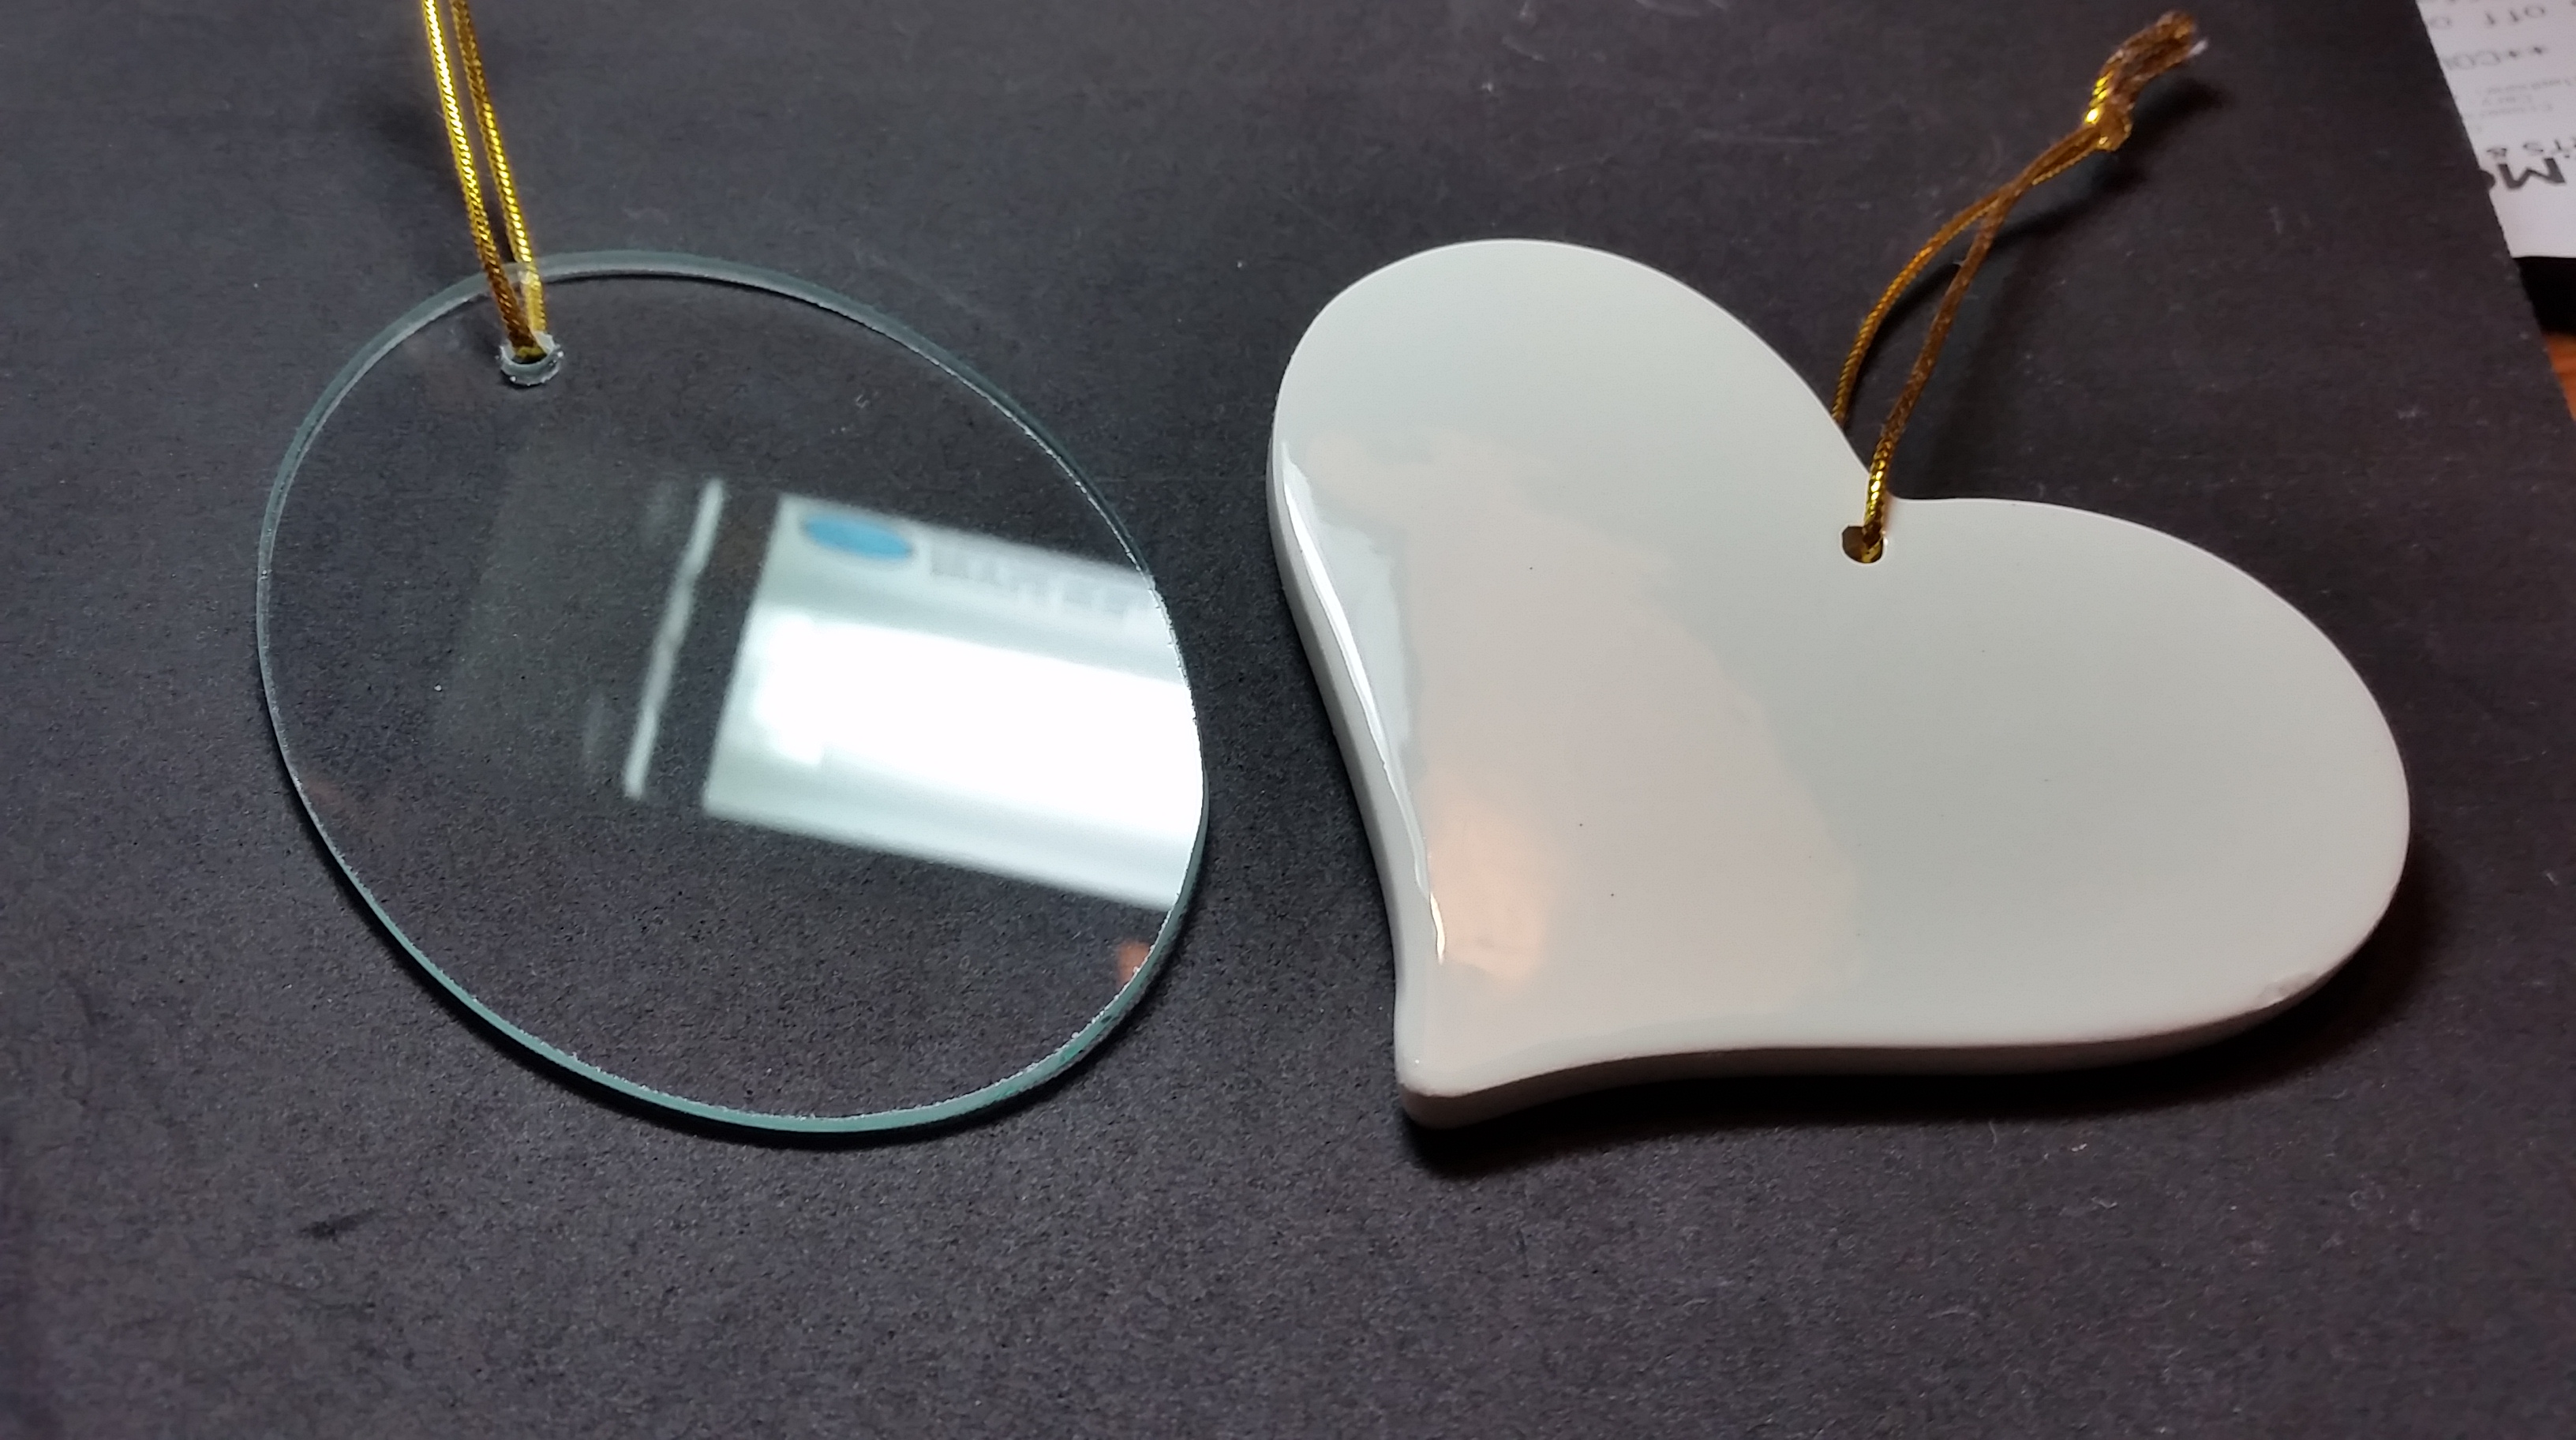 The two blank Christmas ornaments. On the left is the glass on (and the reflection of the Ott light is intentional, to show the surface texture), on the right is a ceramic heart.